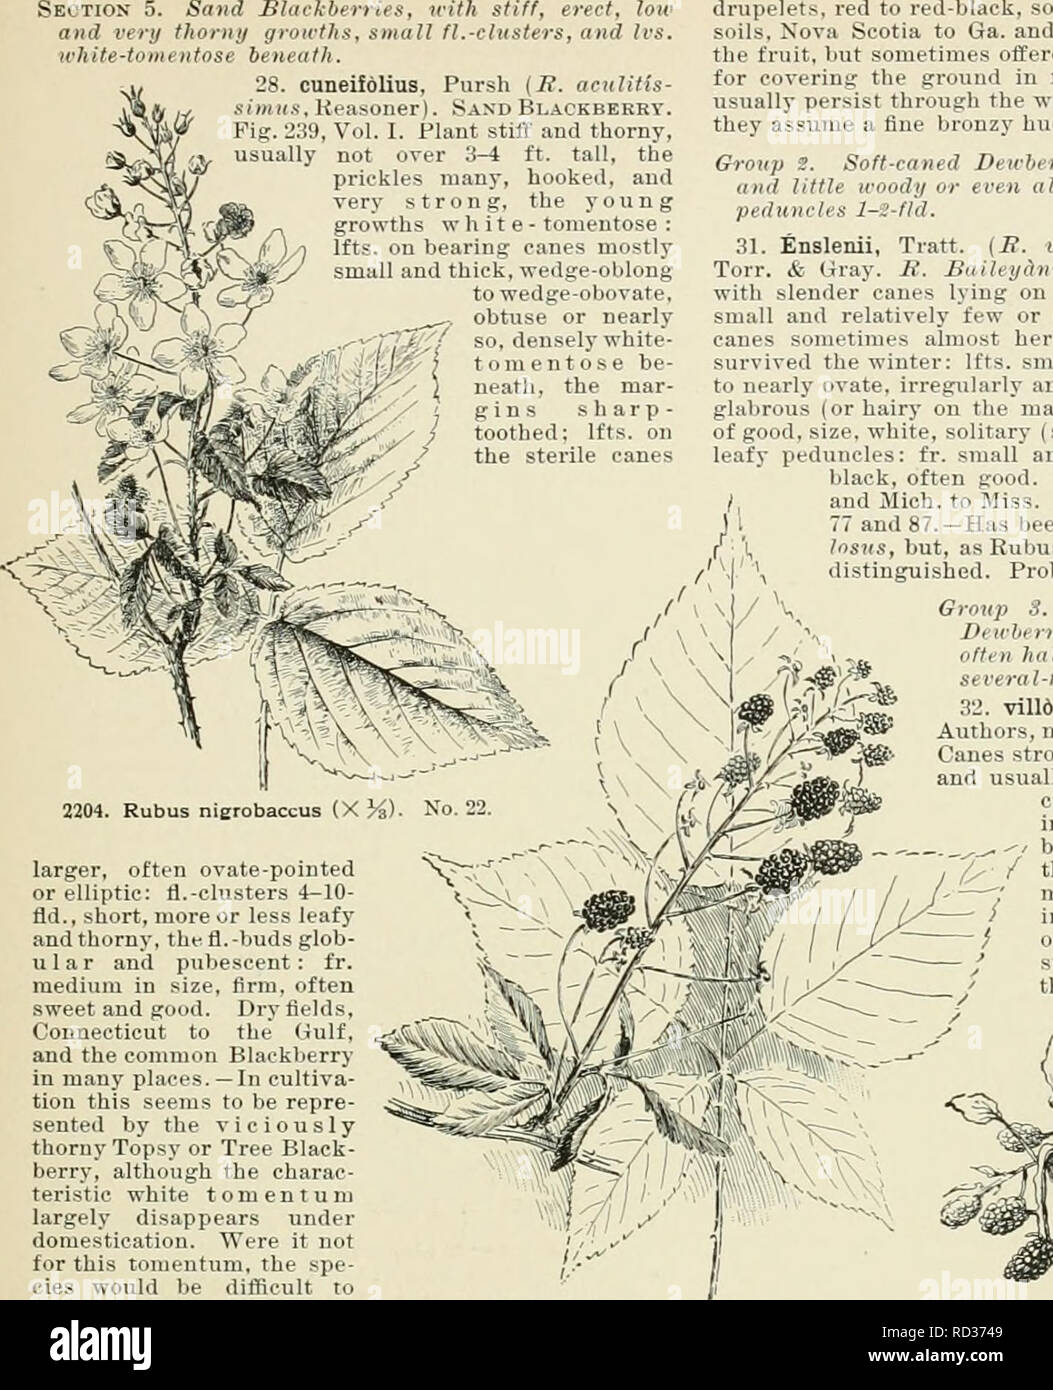 Cyclopedia of American horticulture, comprising suggestions for cultivation  of horticultural plants, descriptions of the species of fruits, vegetables,  flowers, and ornamental plants sold in the United States and Canada,  together with